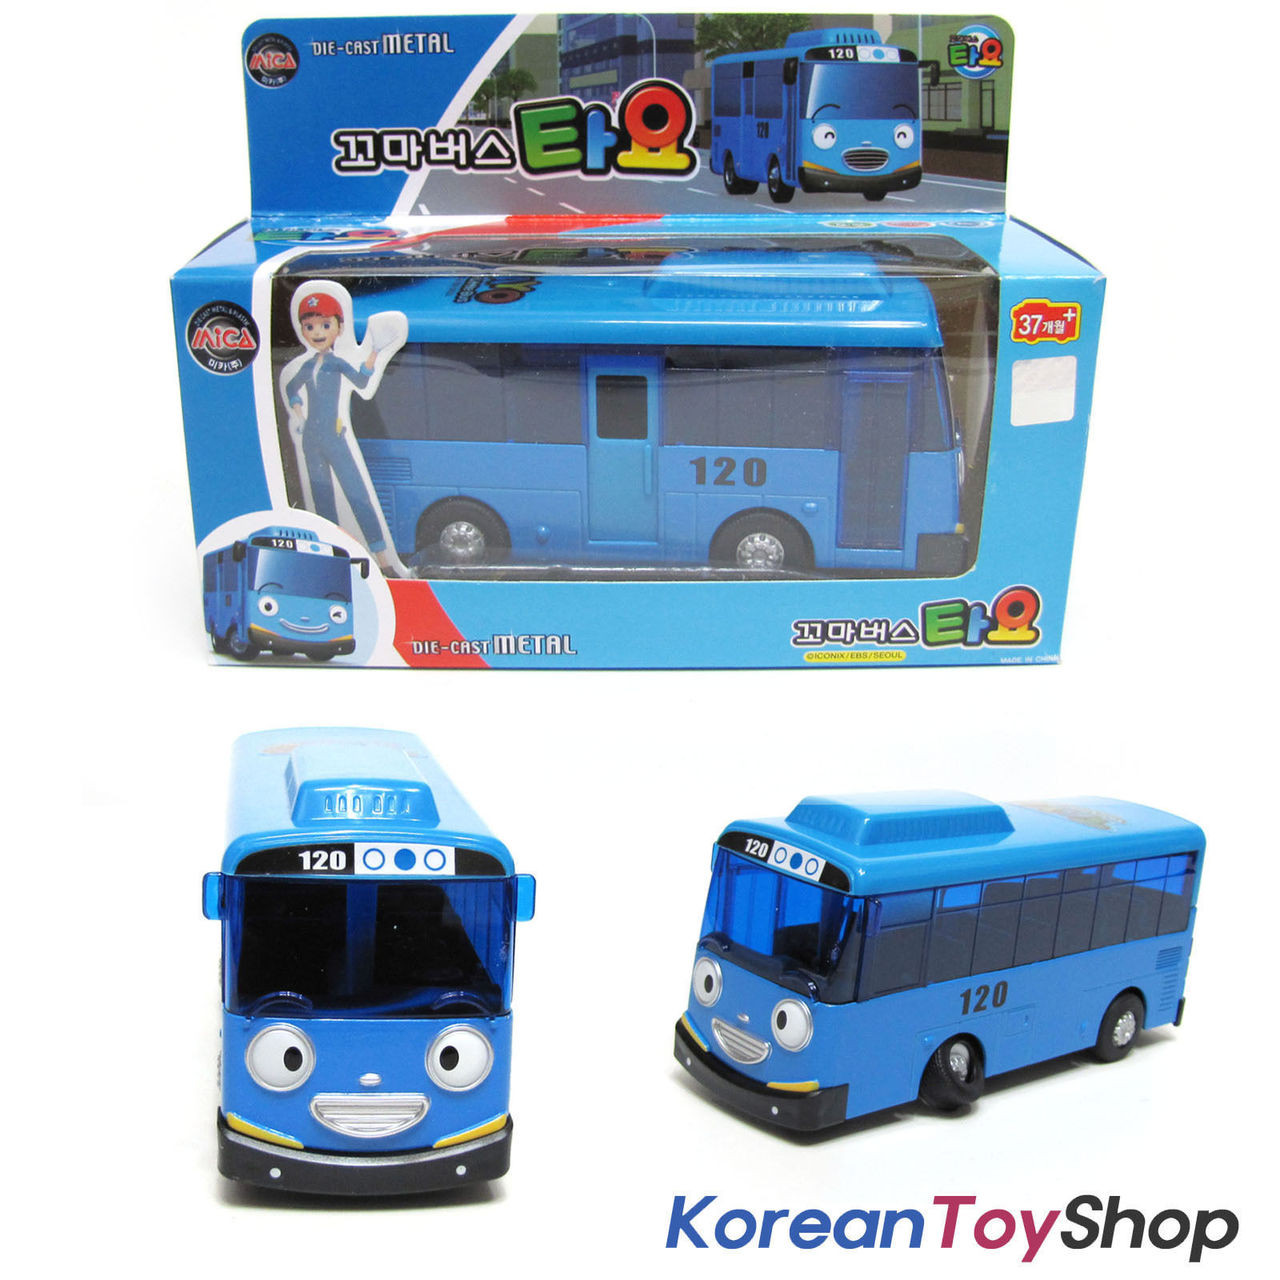 the toy bus